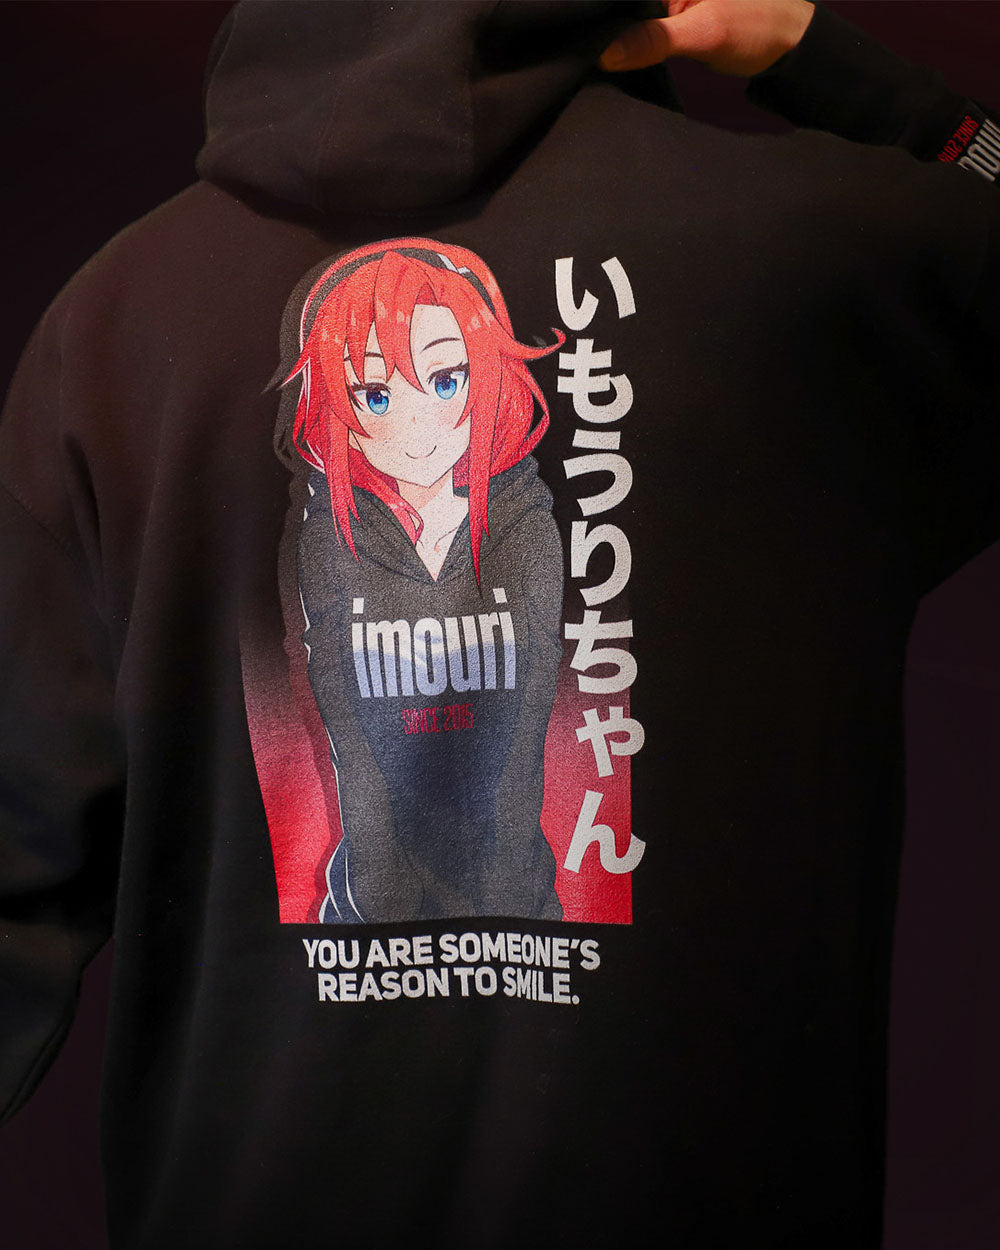 Best Anime Clothing  Anime Streetwear Store SugoiClothing  Sugoi Clothing  Store